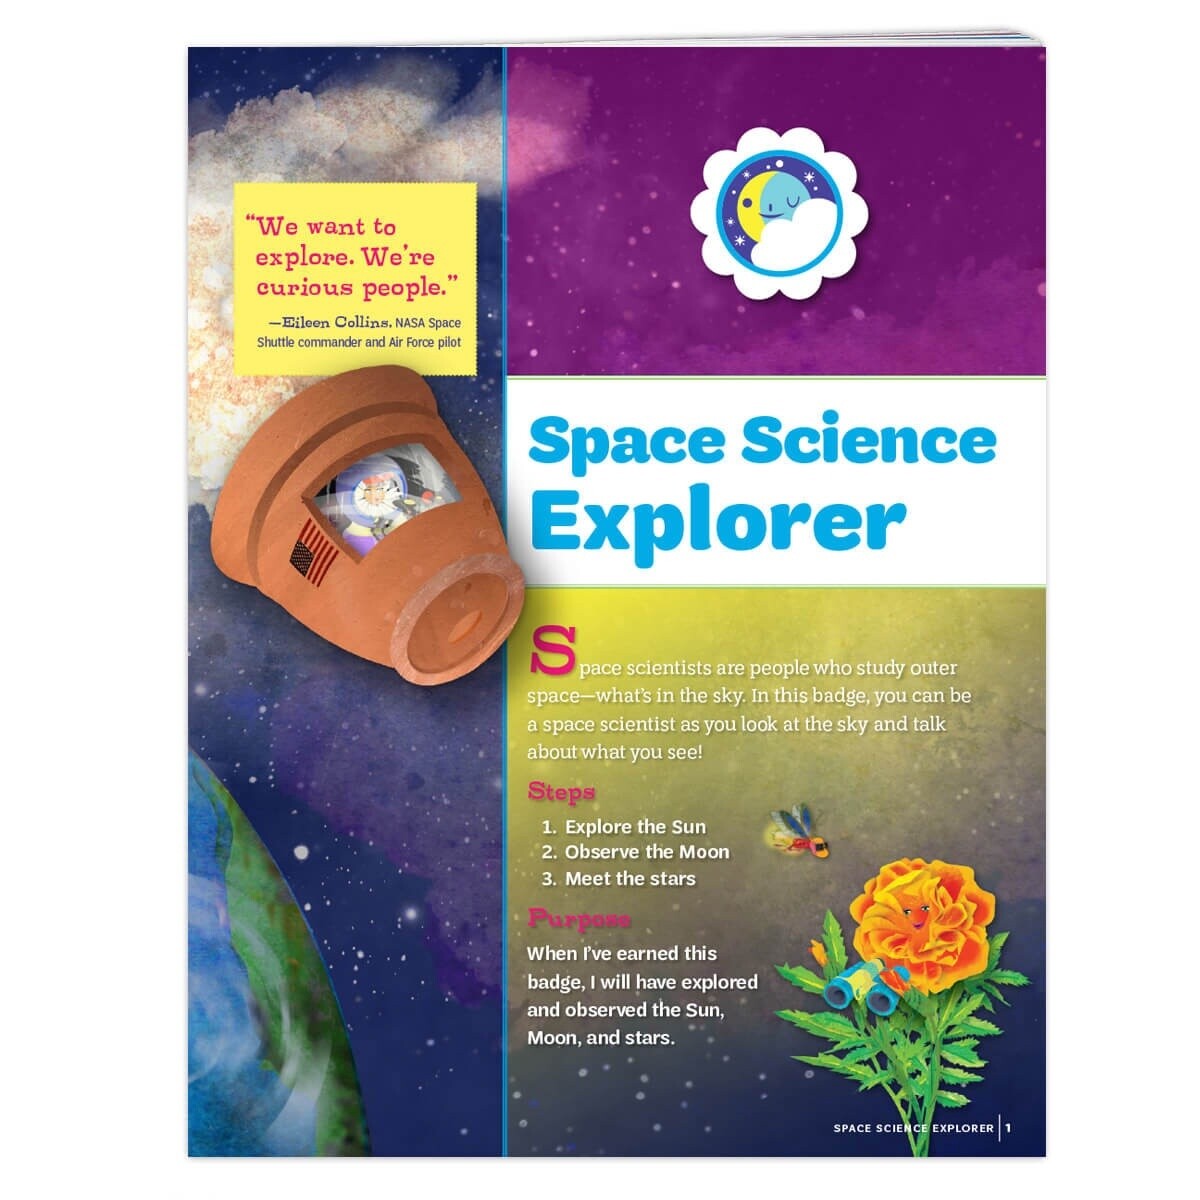 Daisy Space Science Explorer Requirements